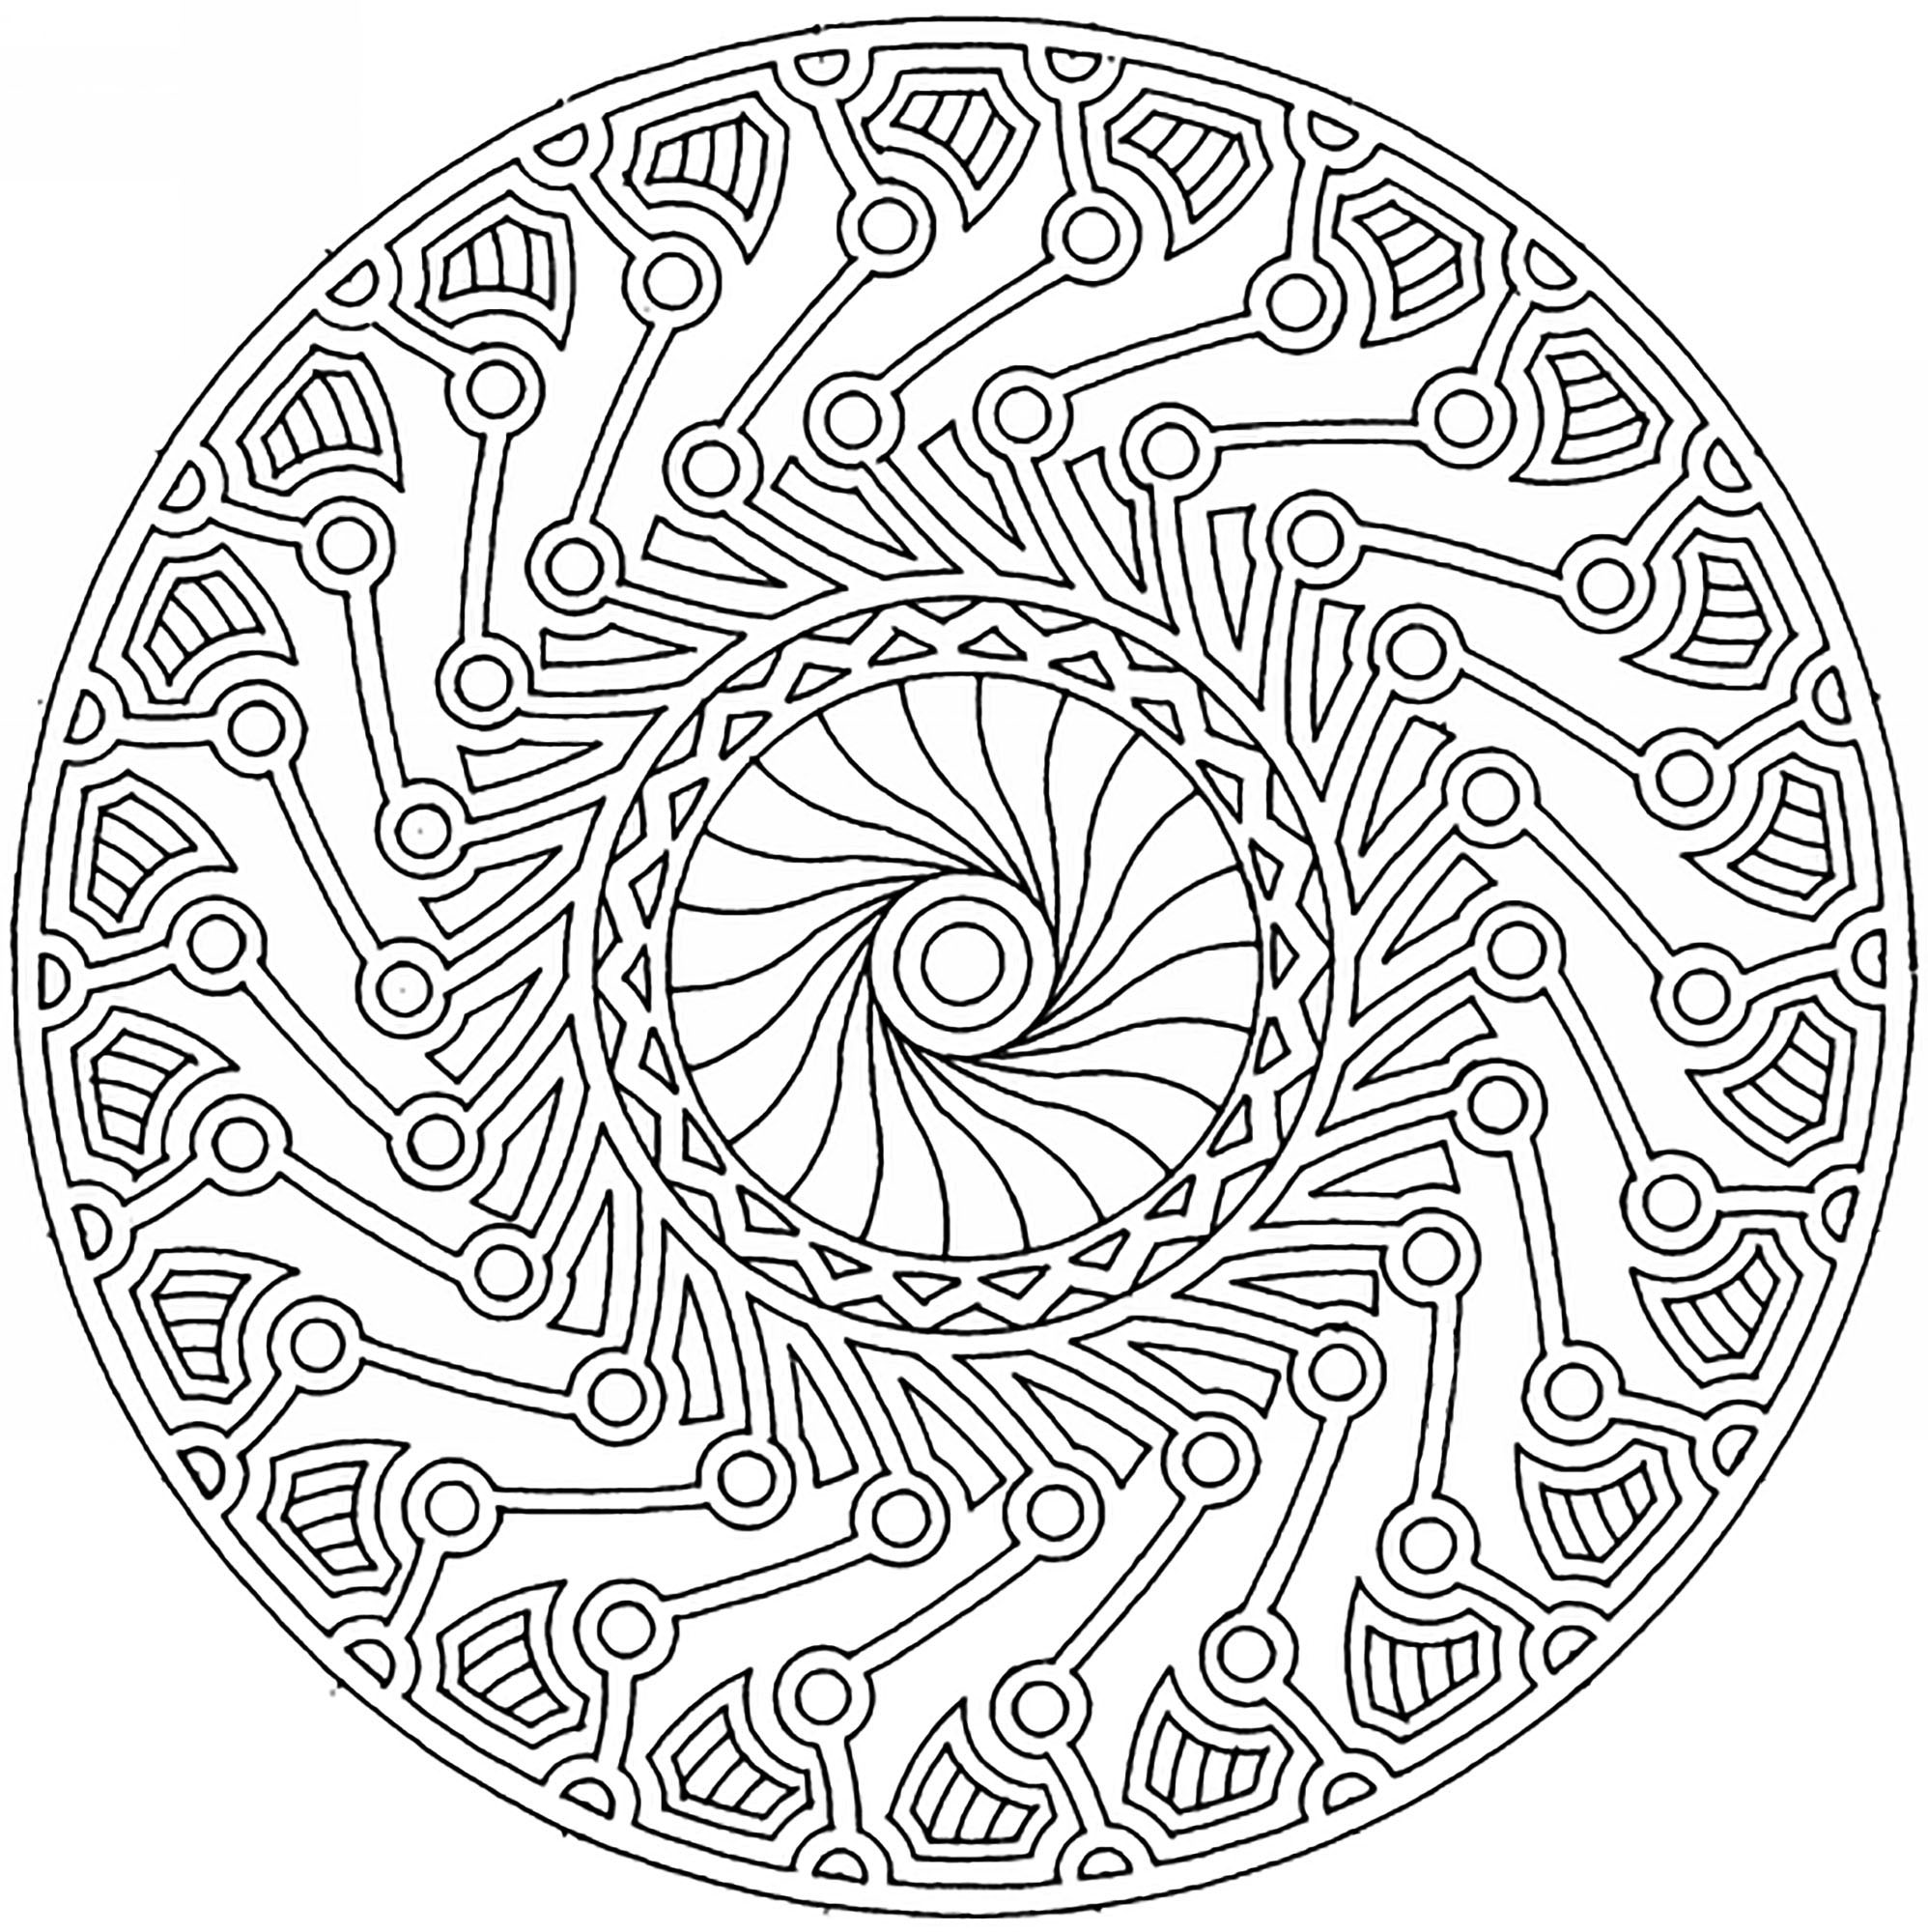 Mandala harmony and complexity   Difficult Mandalas for adults